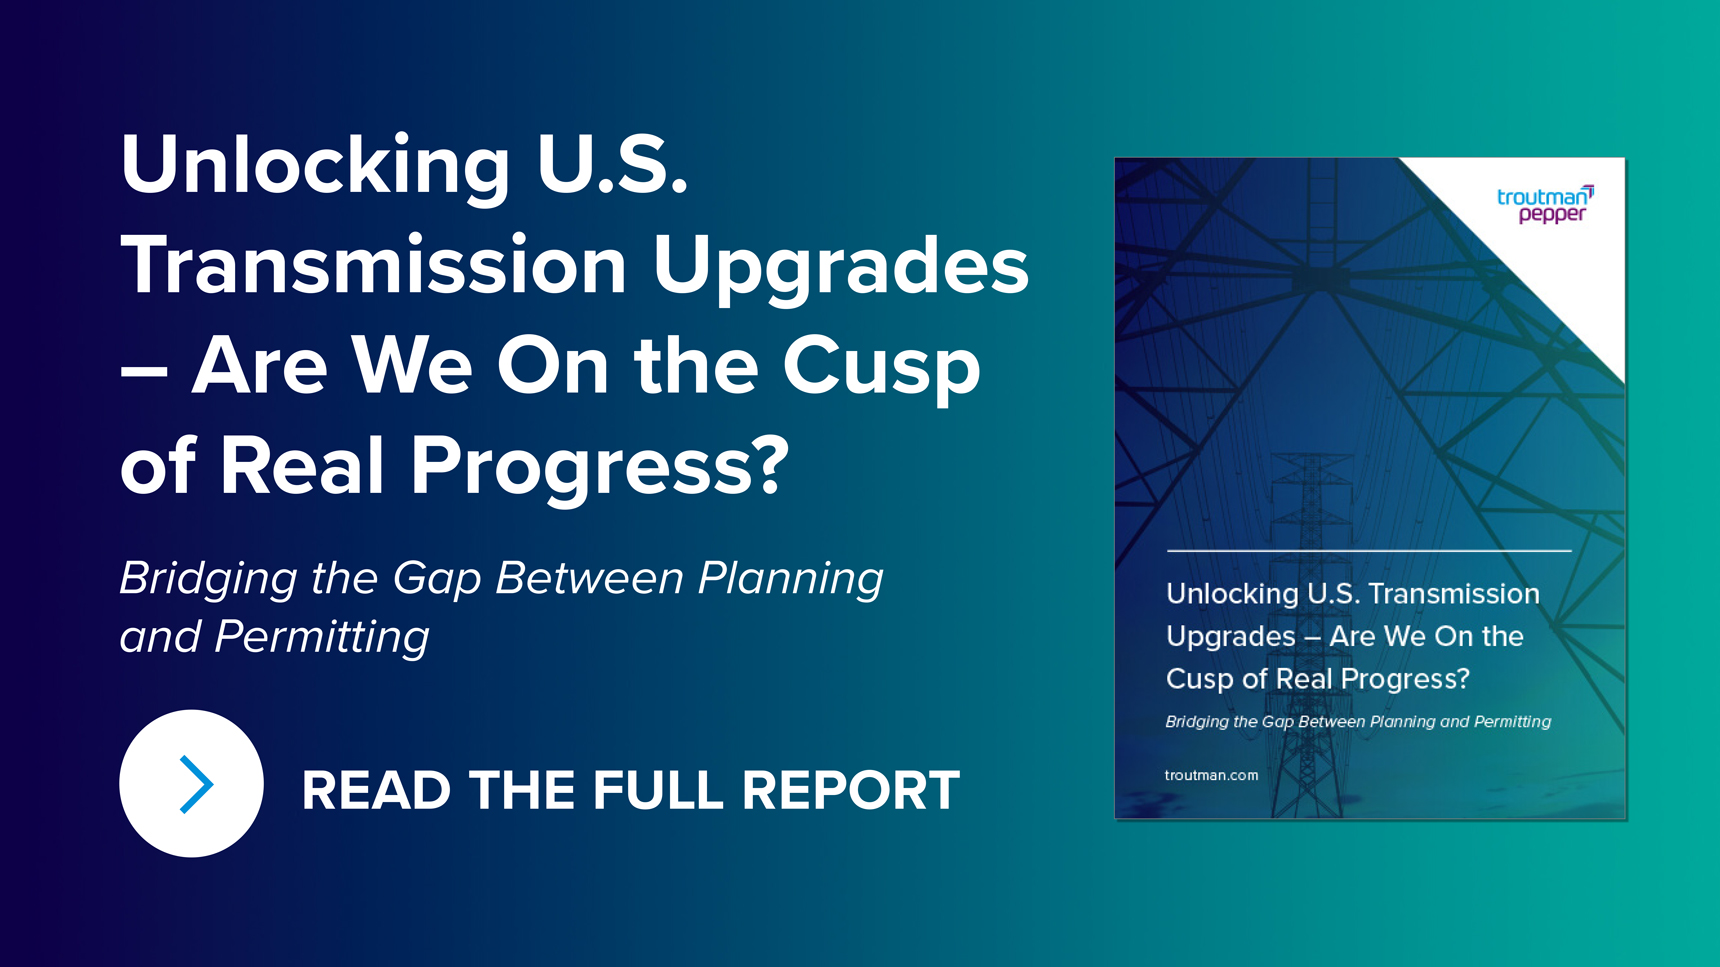 Unlocking U.S. Transmission Upgrades - Are We On the Cusp of Real Progress? Bridging the Gap Between Planning and Permitting. Read the Full Report with arrow icon and an image of the cover of the PDF